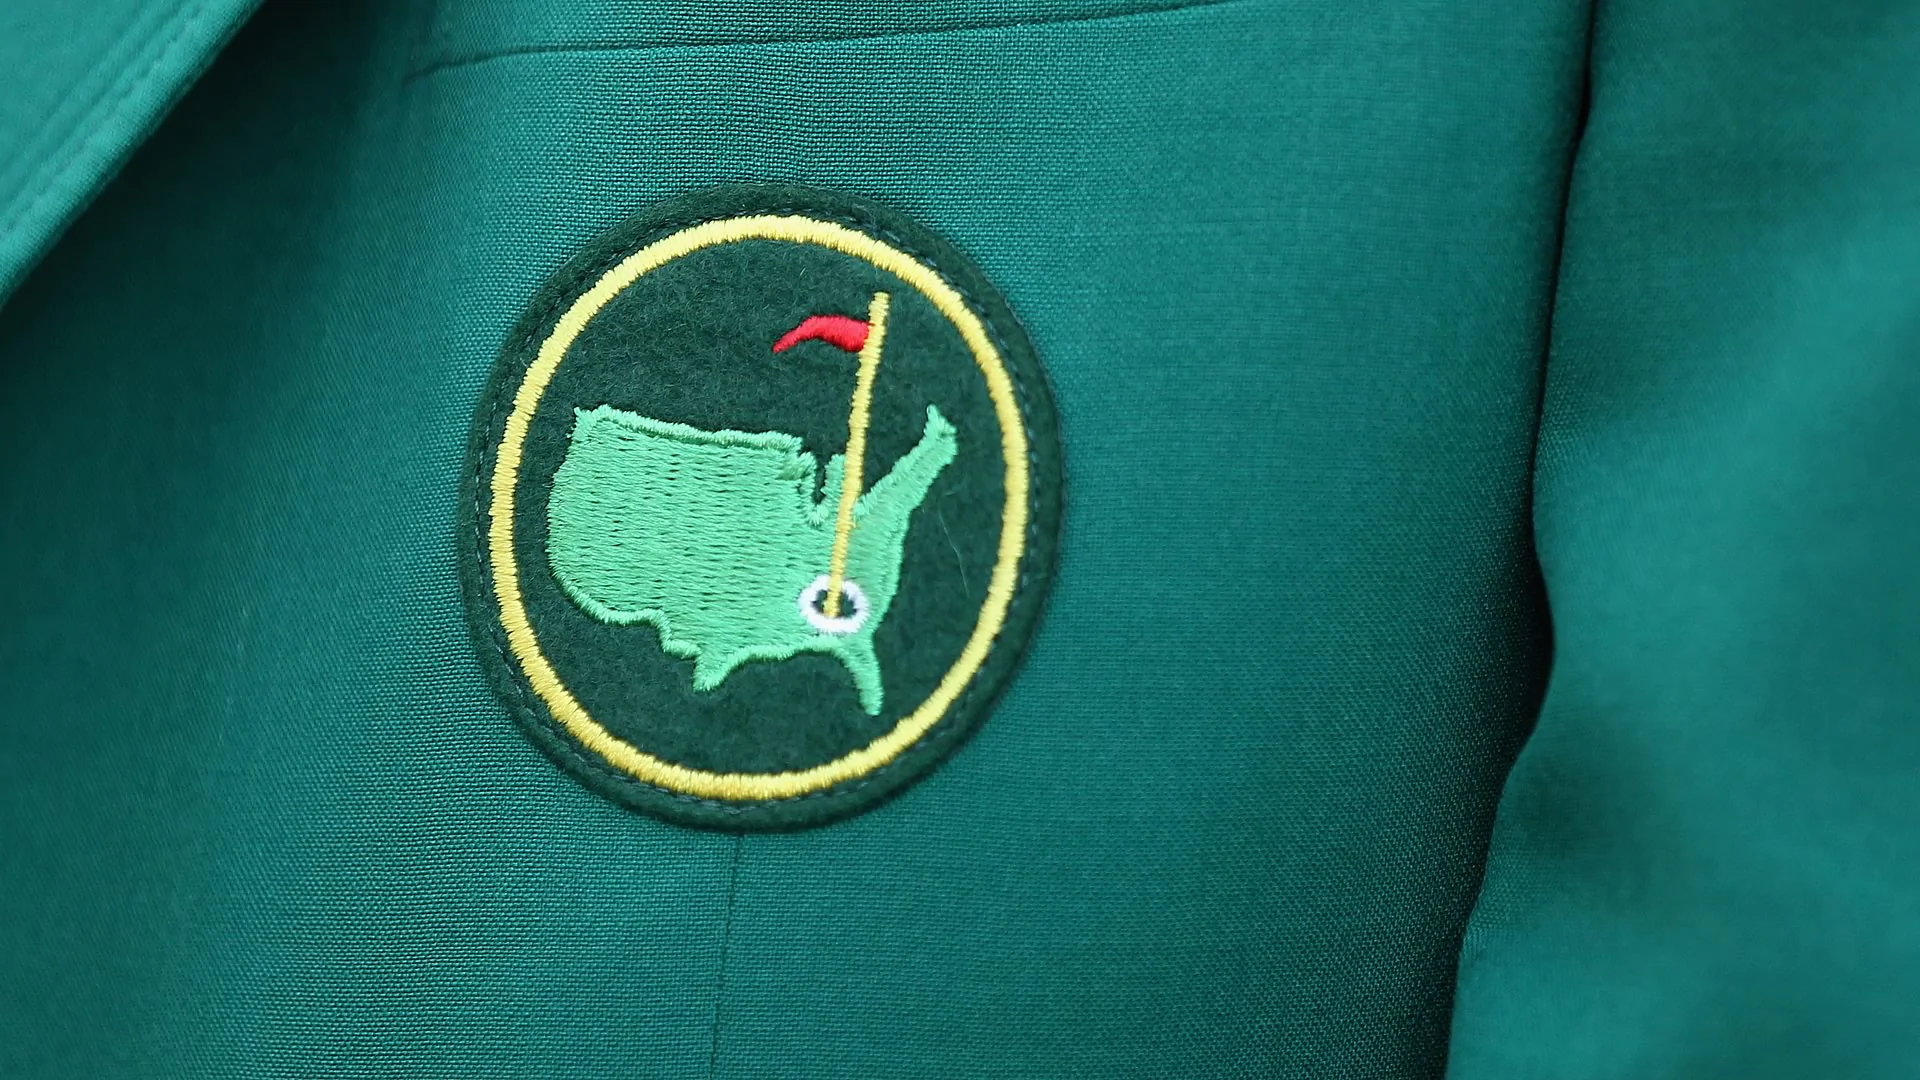 Punch Shot: Who will win the 2021 Masters Tournament